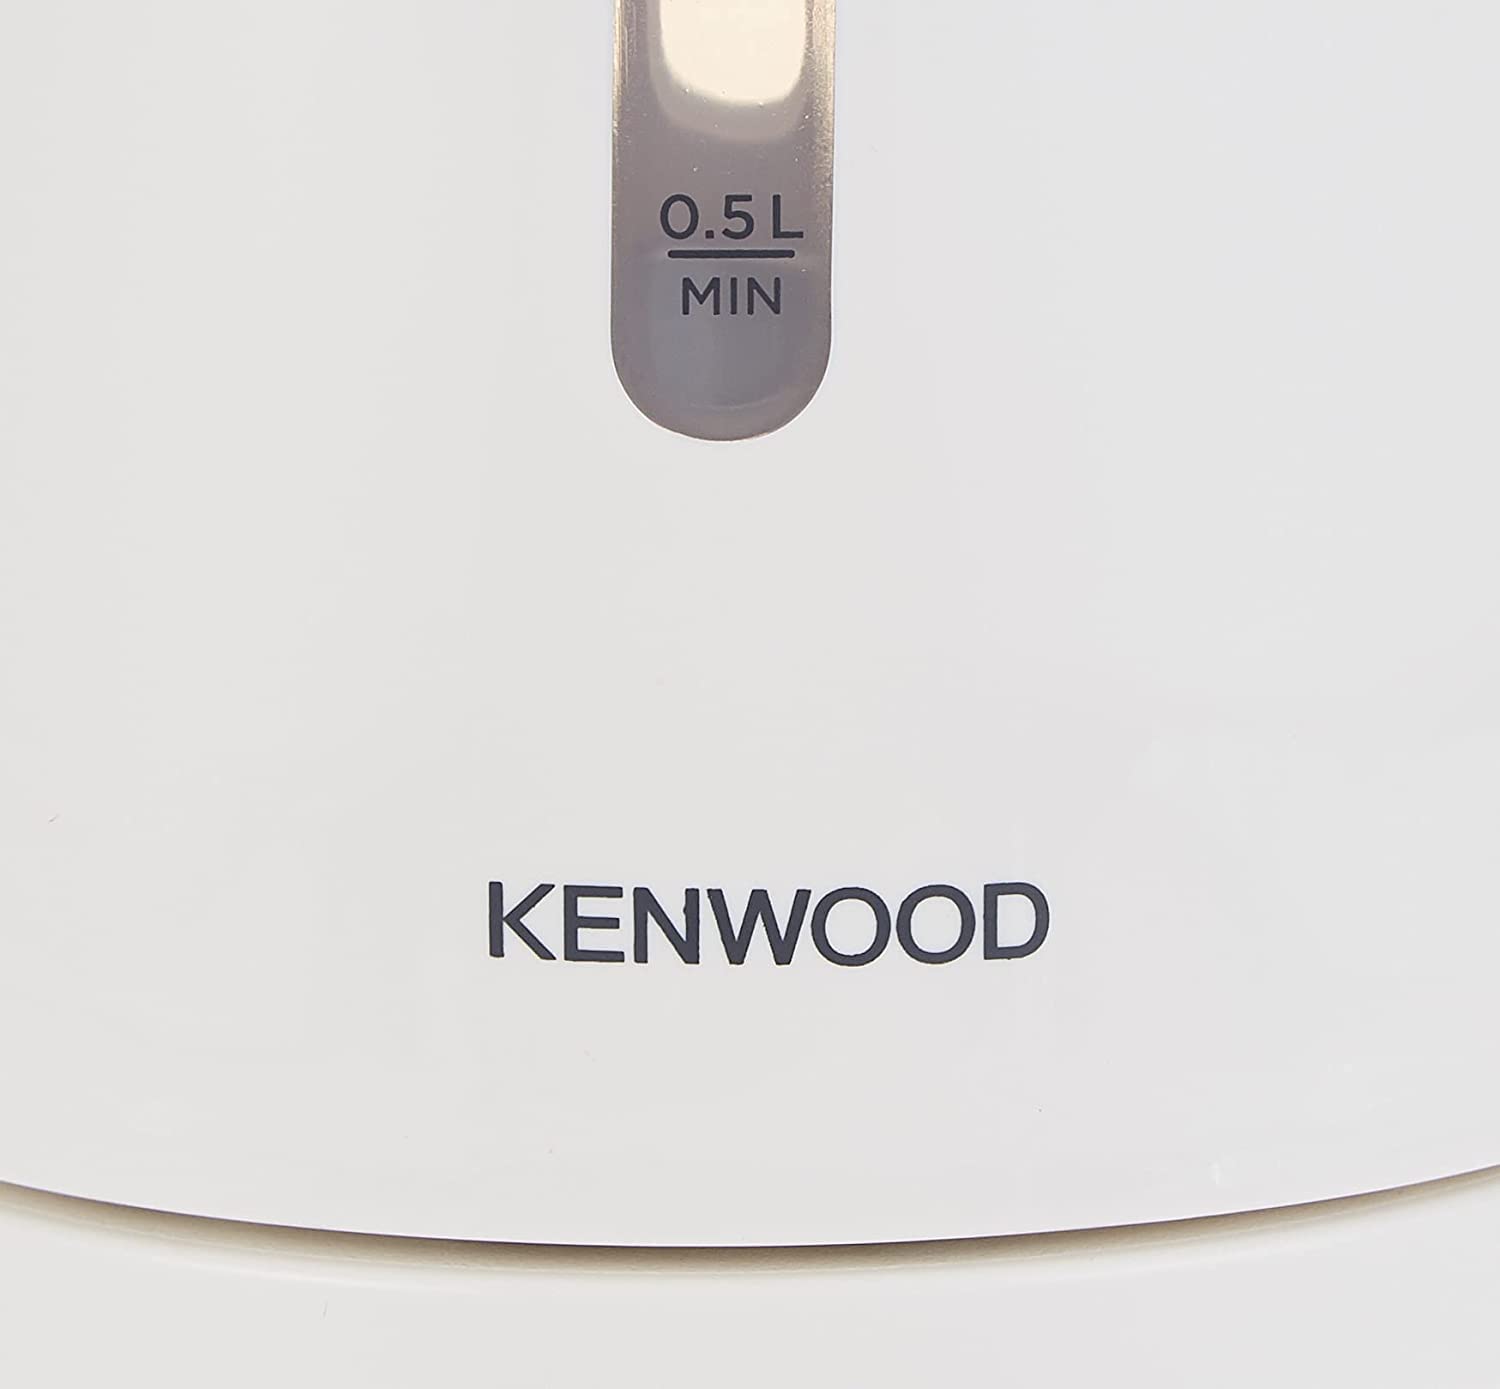 Kenwood Kettle 1.7L Cordless Electric Kettle 2200W With Auto Shut-Off & Removable Mesh Filter Zjp00.000Wh